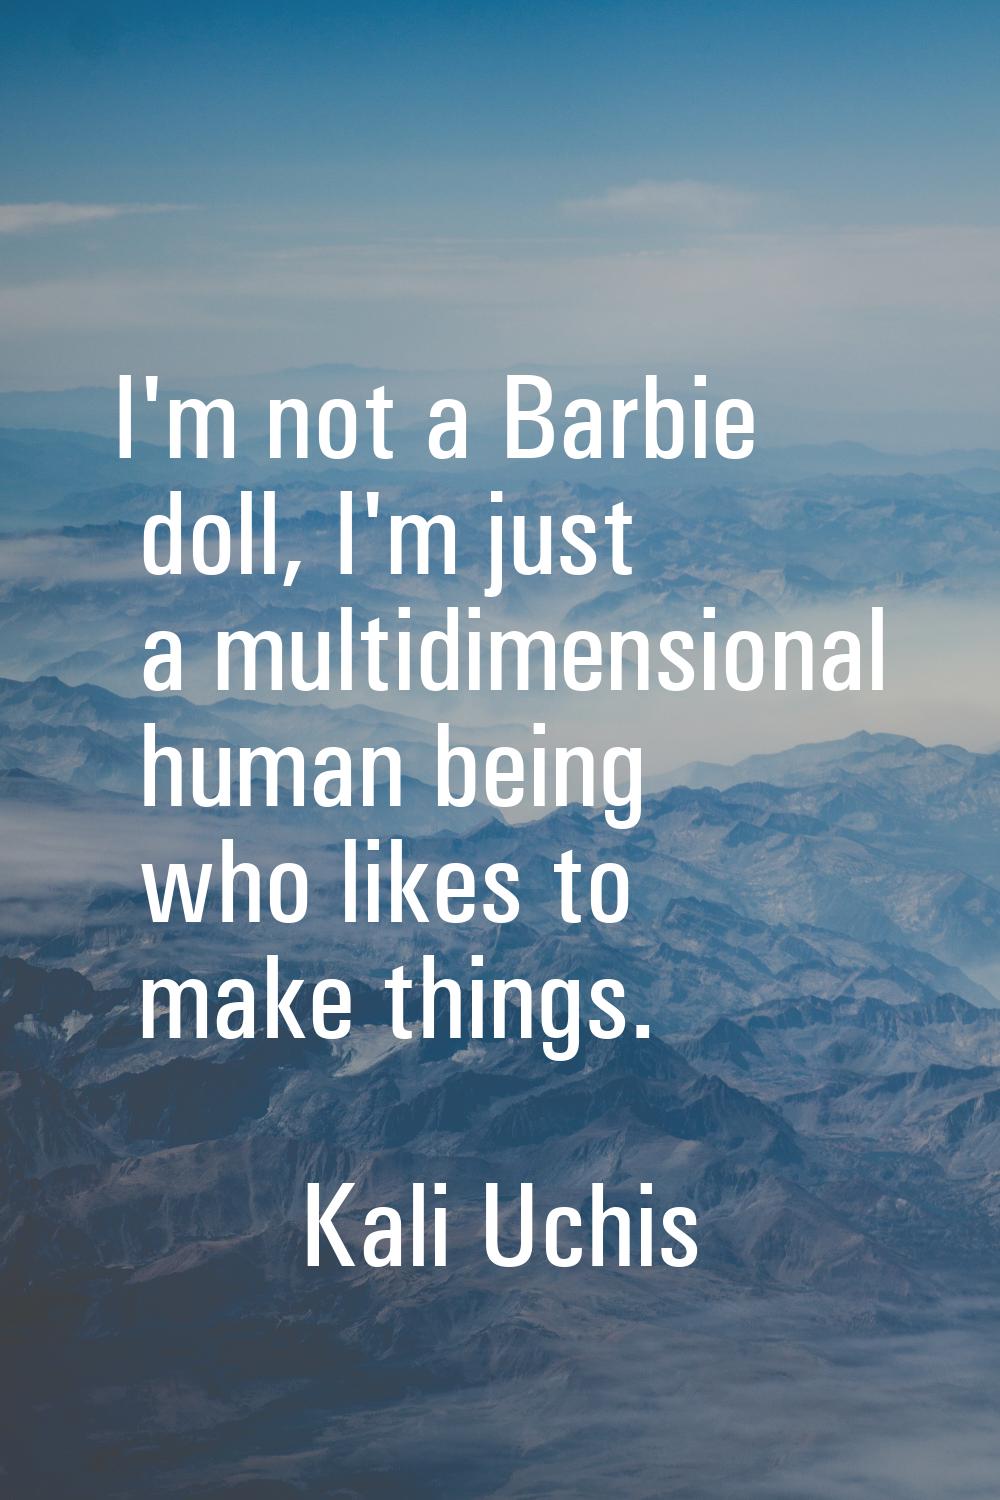 I'm not a Barbie doll, I'm just a multidimensional human being who likes to make things.